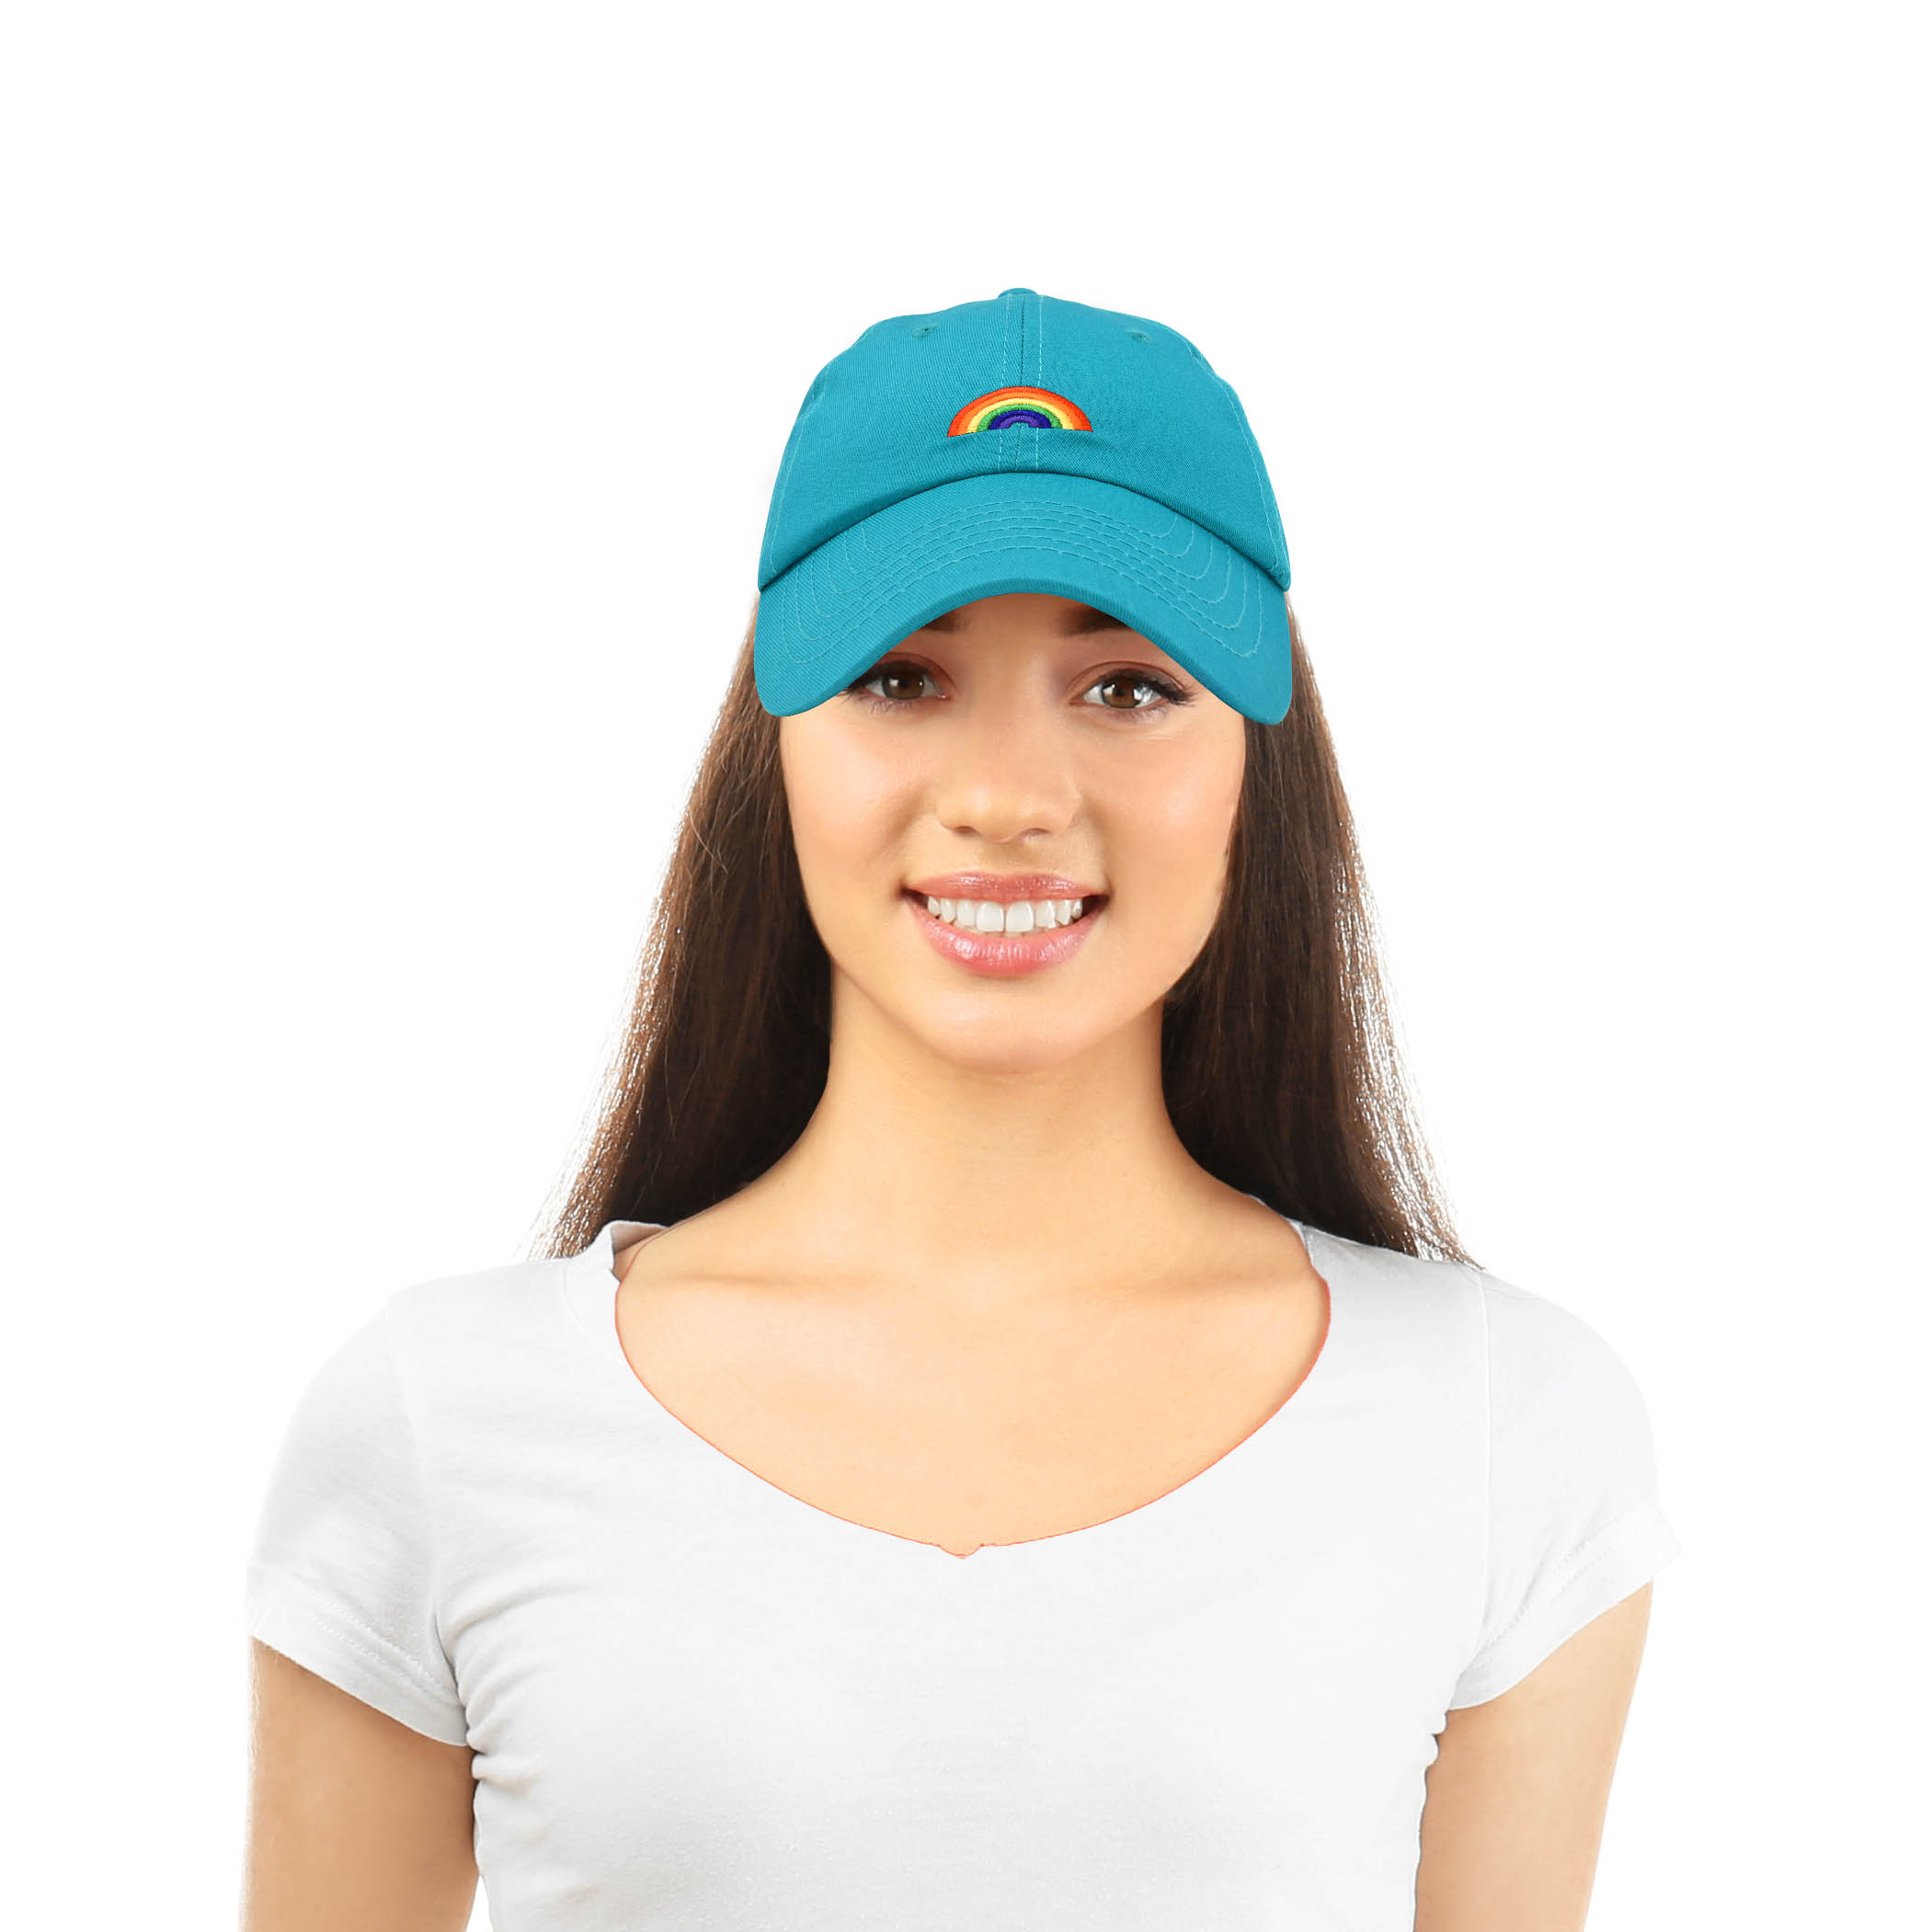 DALIX Rainbow Baseball Cap Womens Hats Cute Hat Soft Cotton Caps in Teal - image 2 of 7